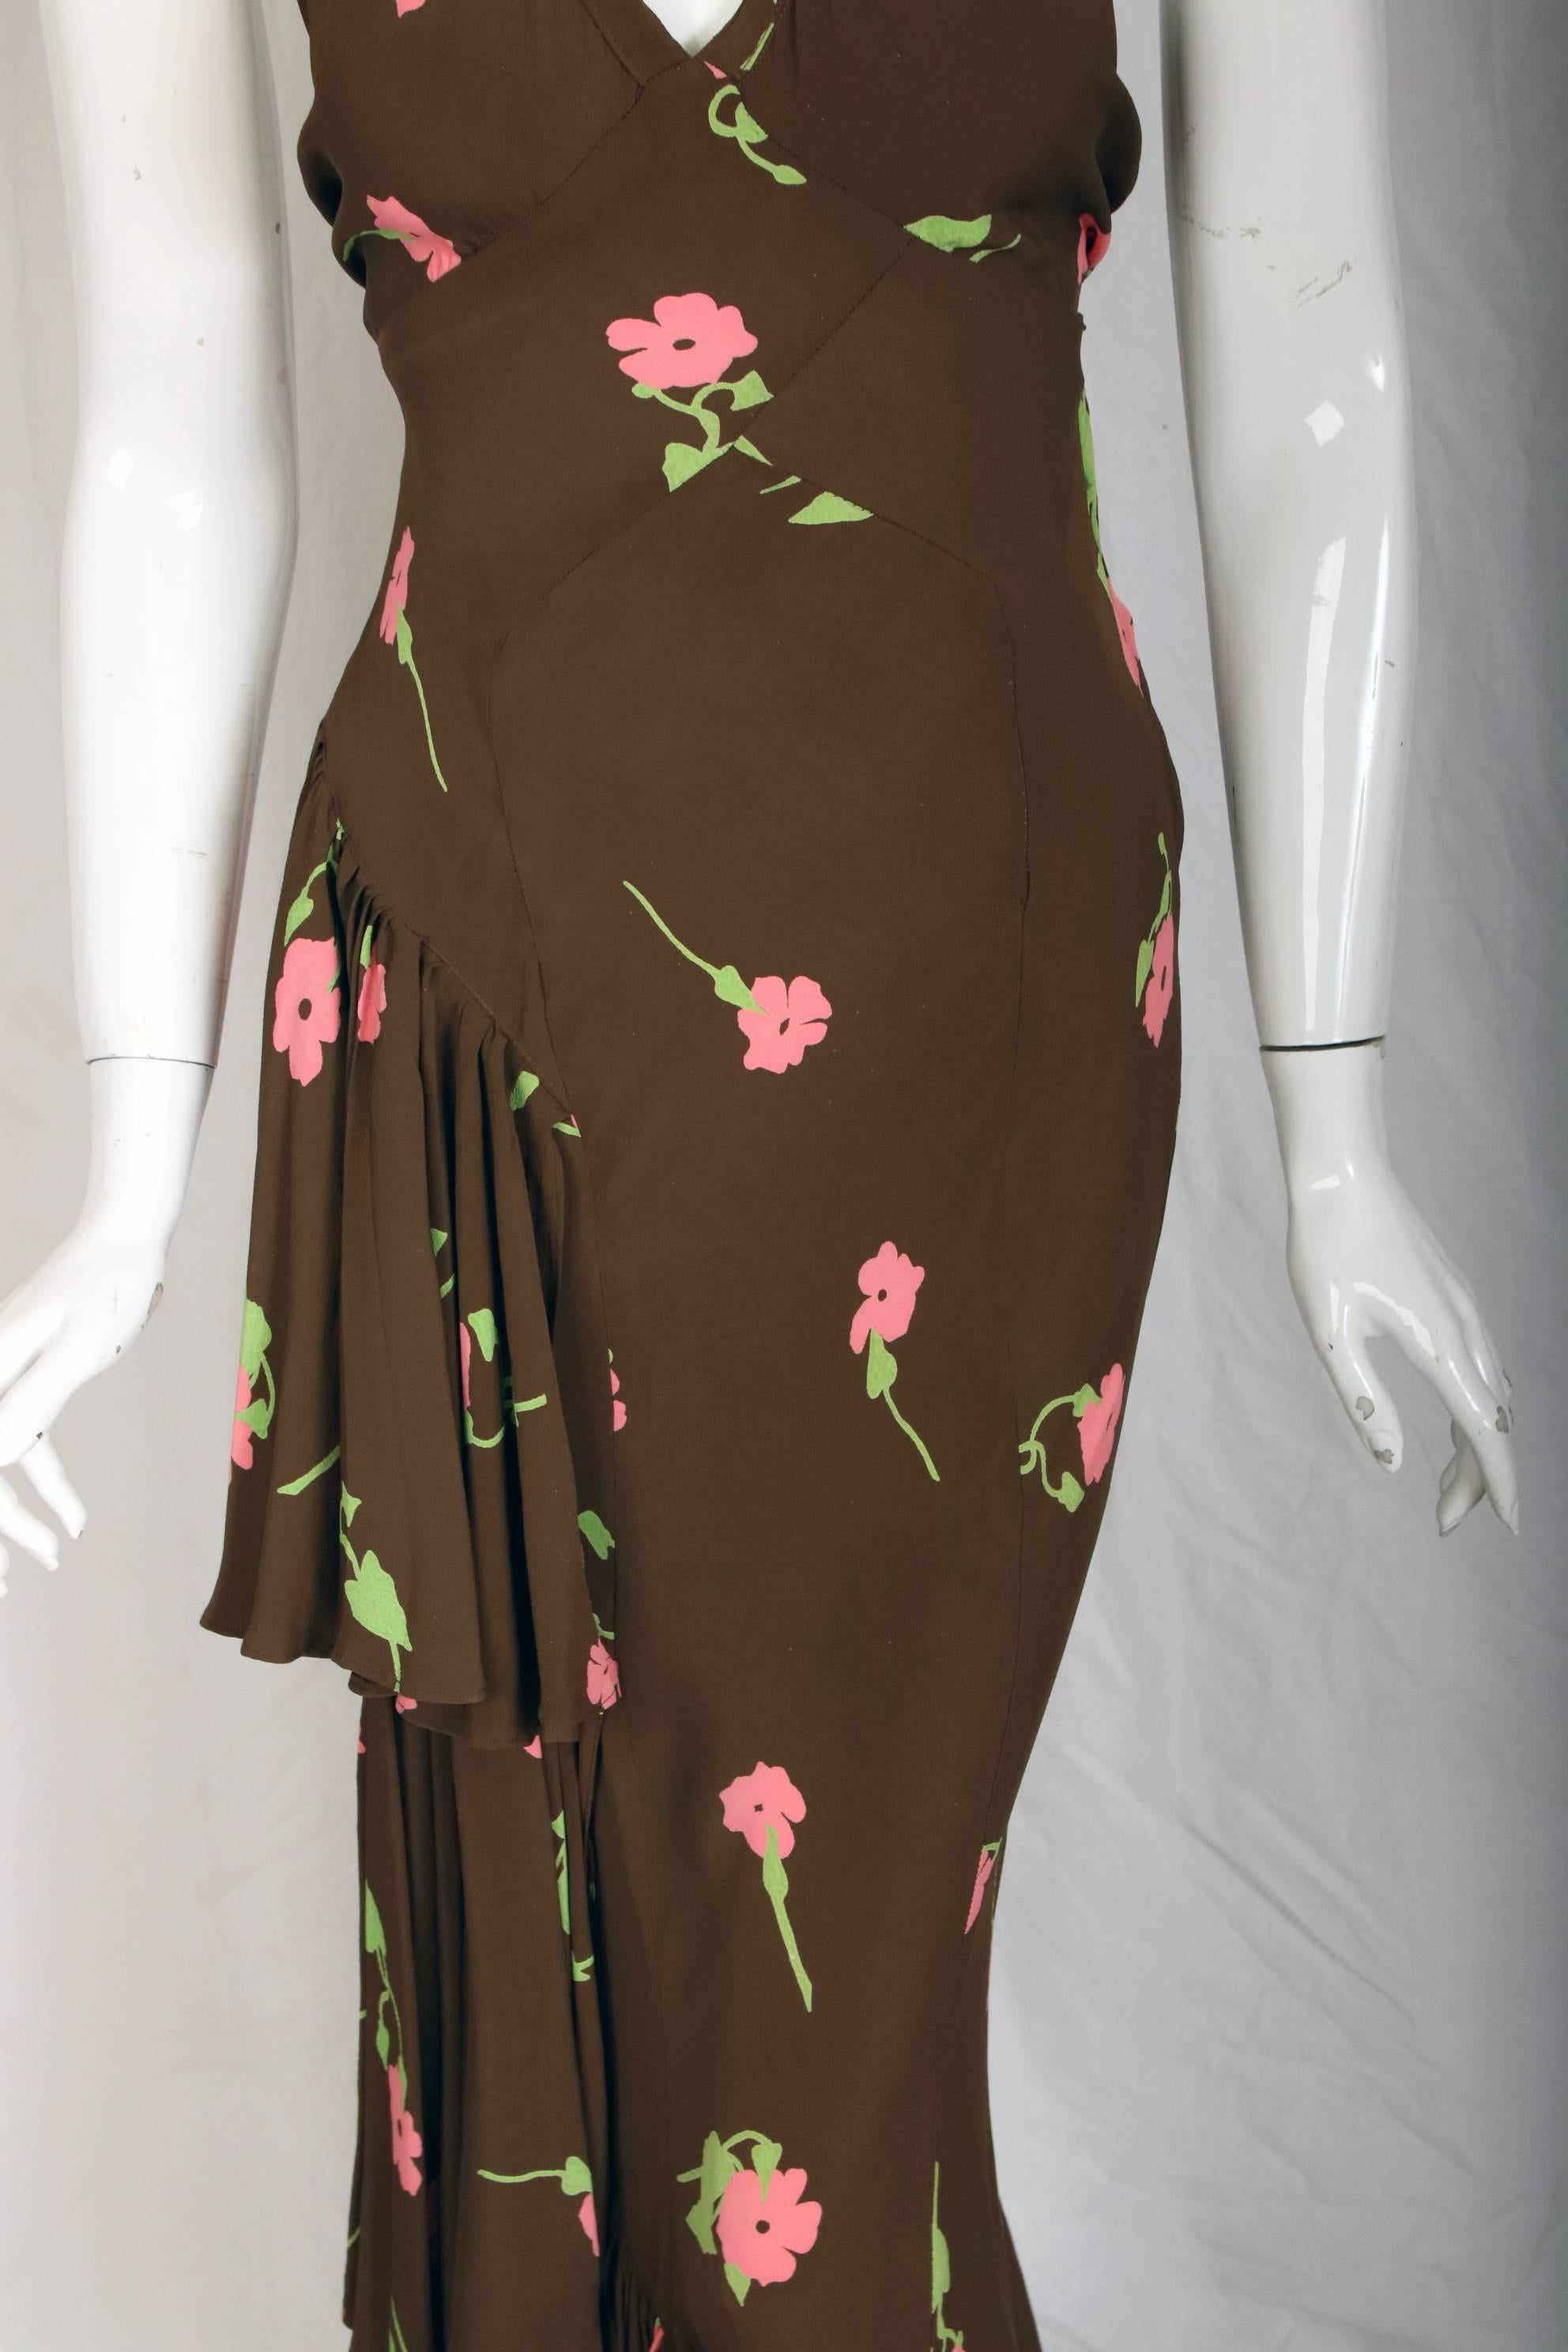 An Ossie Clark bias-cut evening gown with a Celia Birtwell floral print. Gown features one-sided ruffles down the right leg and a shoulder ruffle at the opposing, left shoulder. British Size tag 10 which would likely fit a US 2 or 4. The dress is in